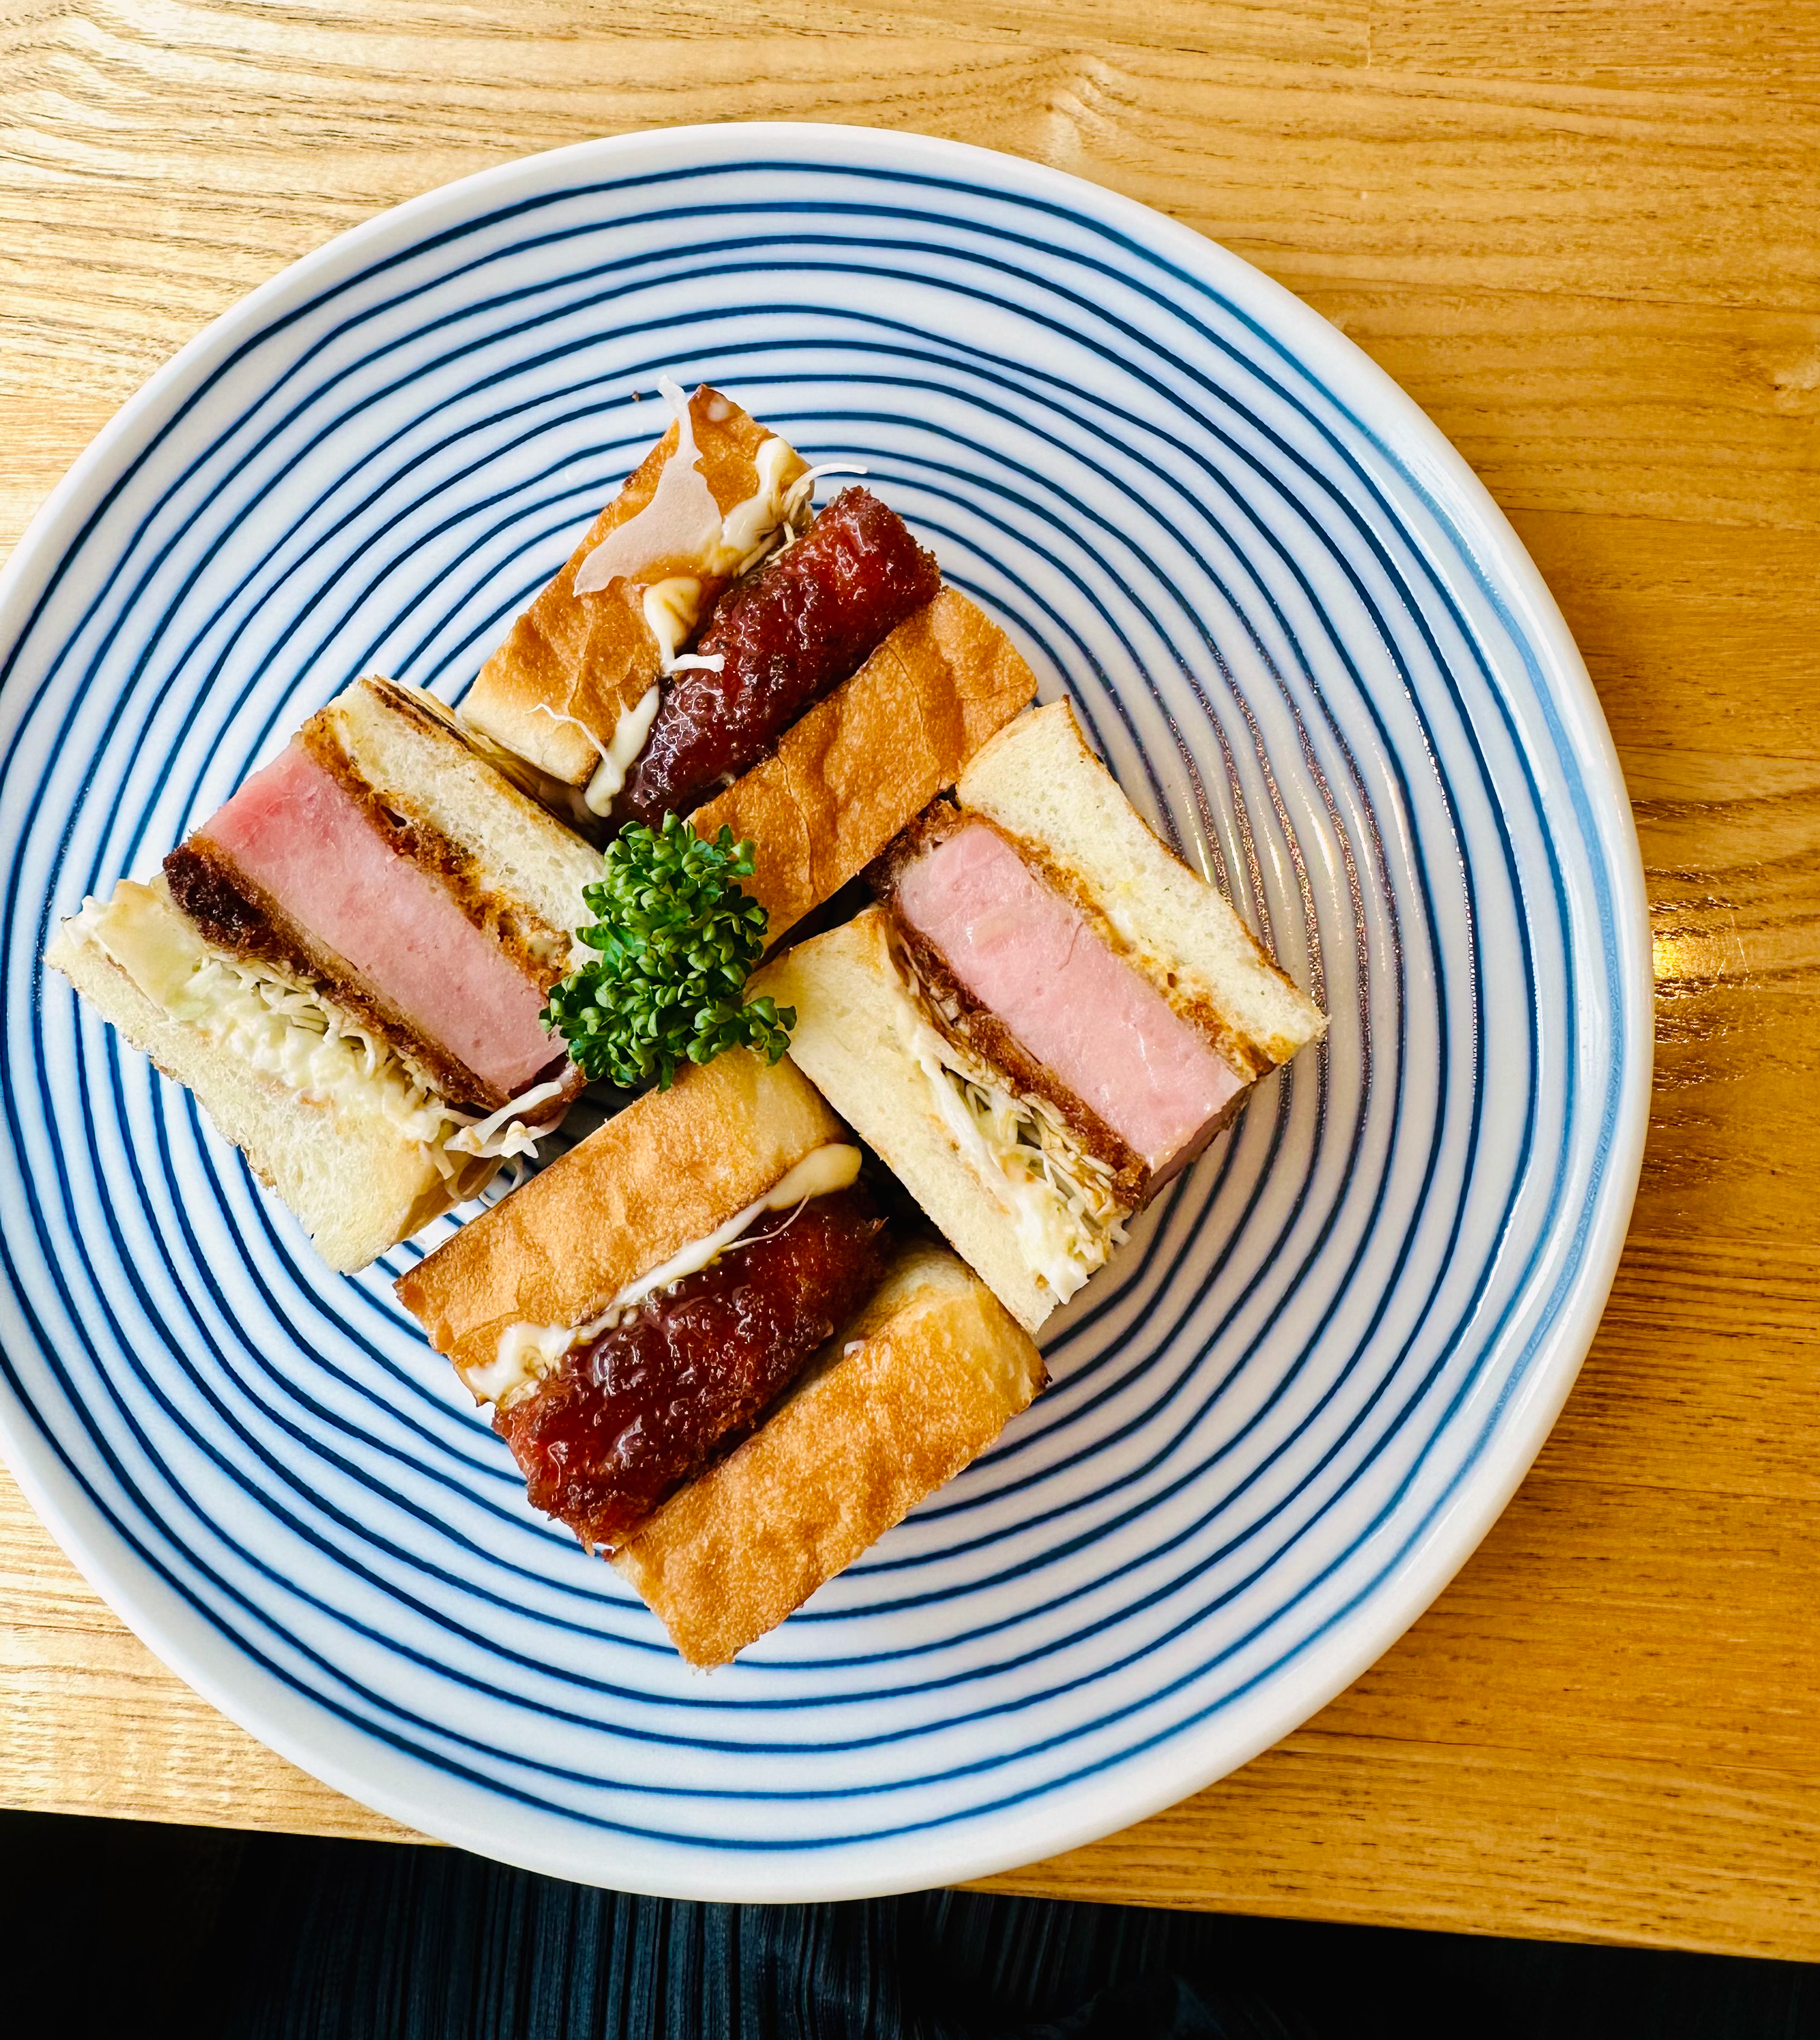 A meaty katsu sandwich cut into four sections, presented side-up on a plate decorated with blue spirals.